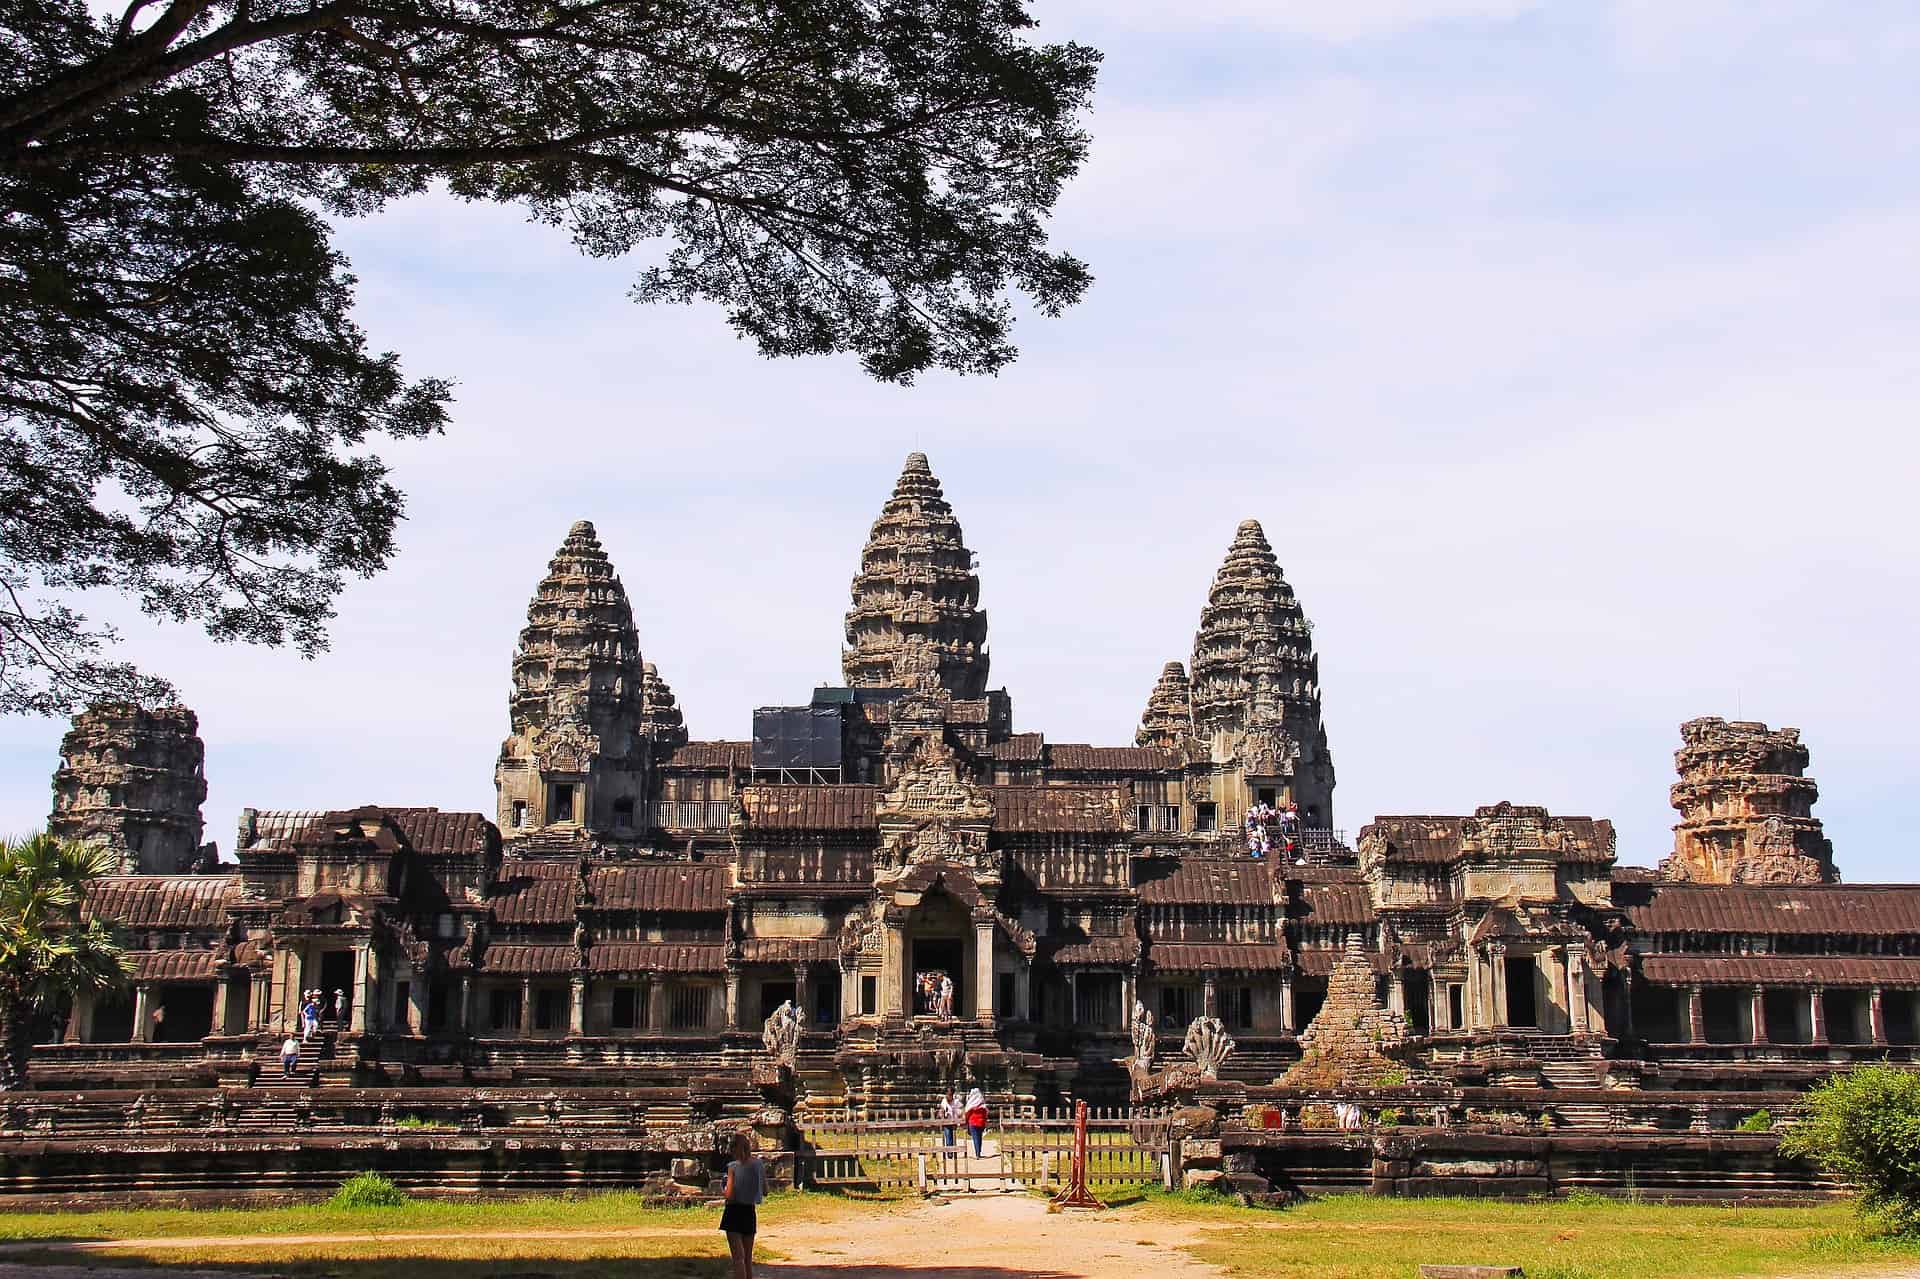 L'omosessuale Siem Reap